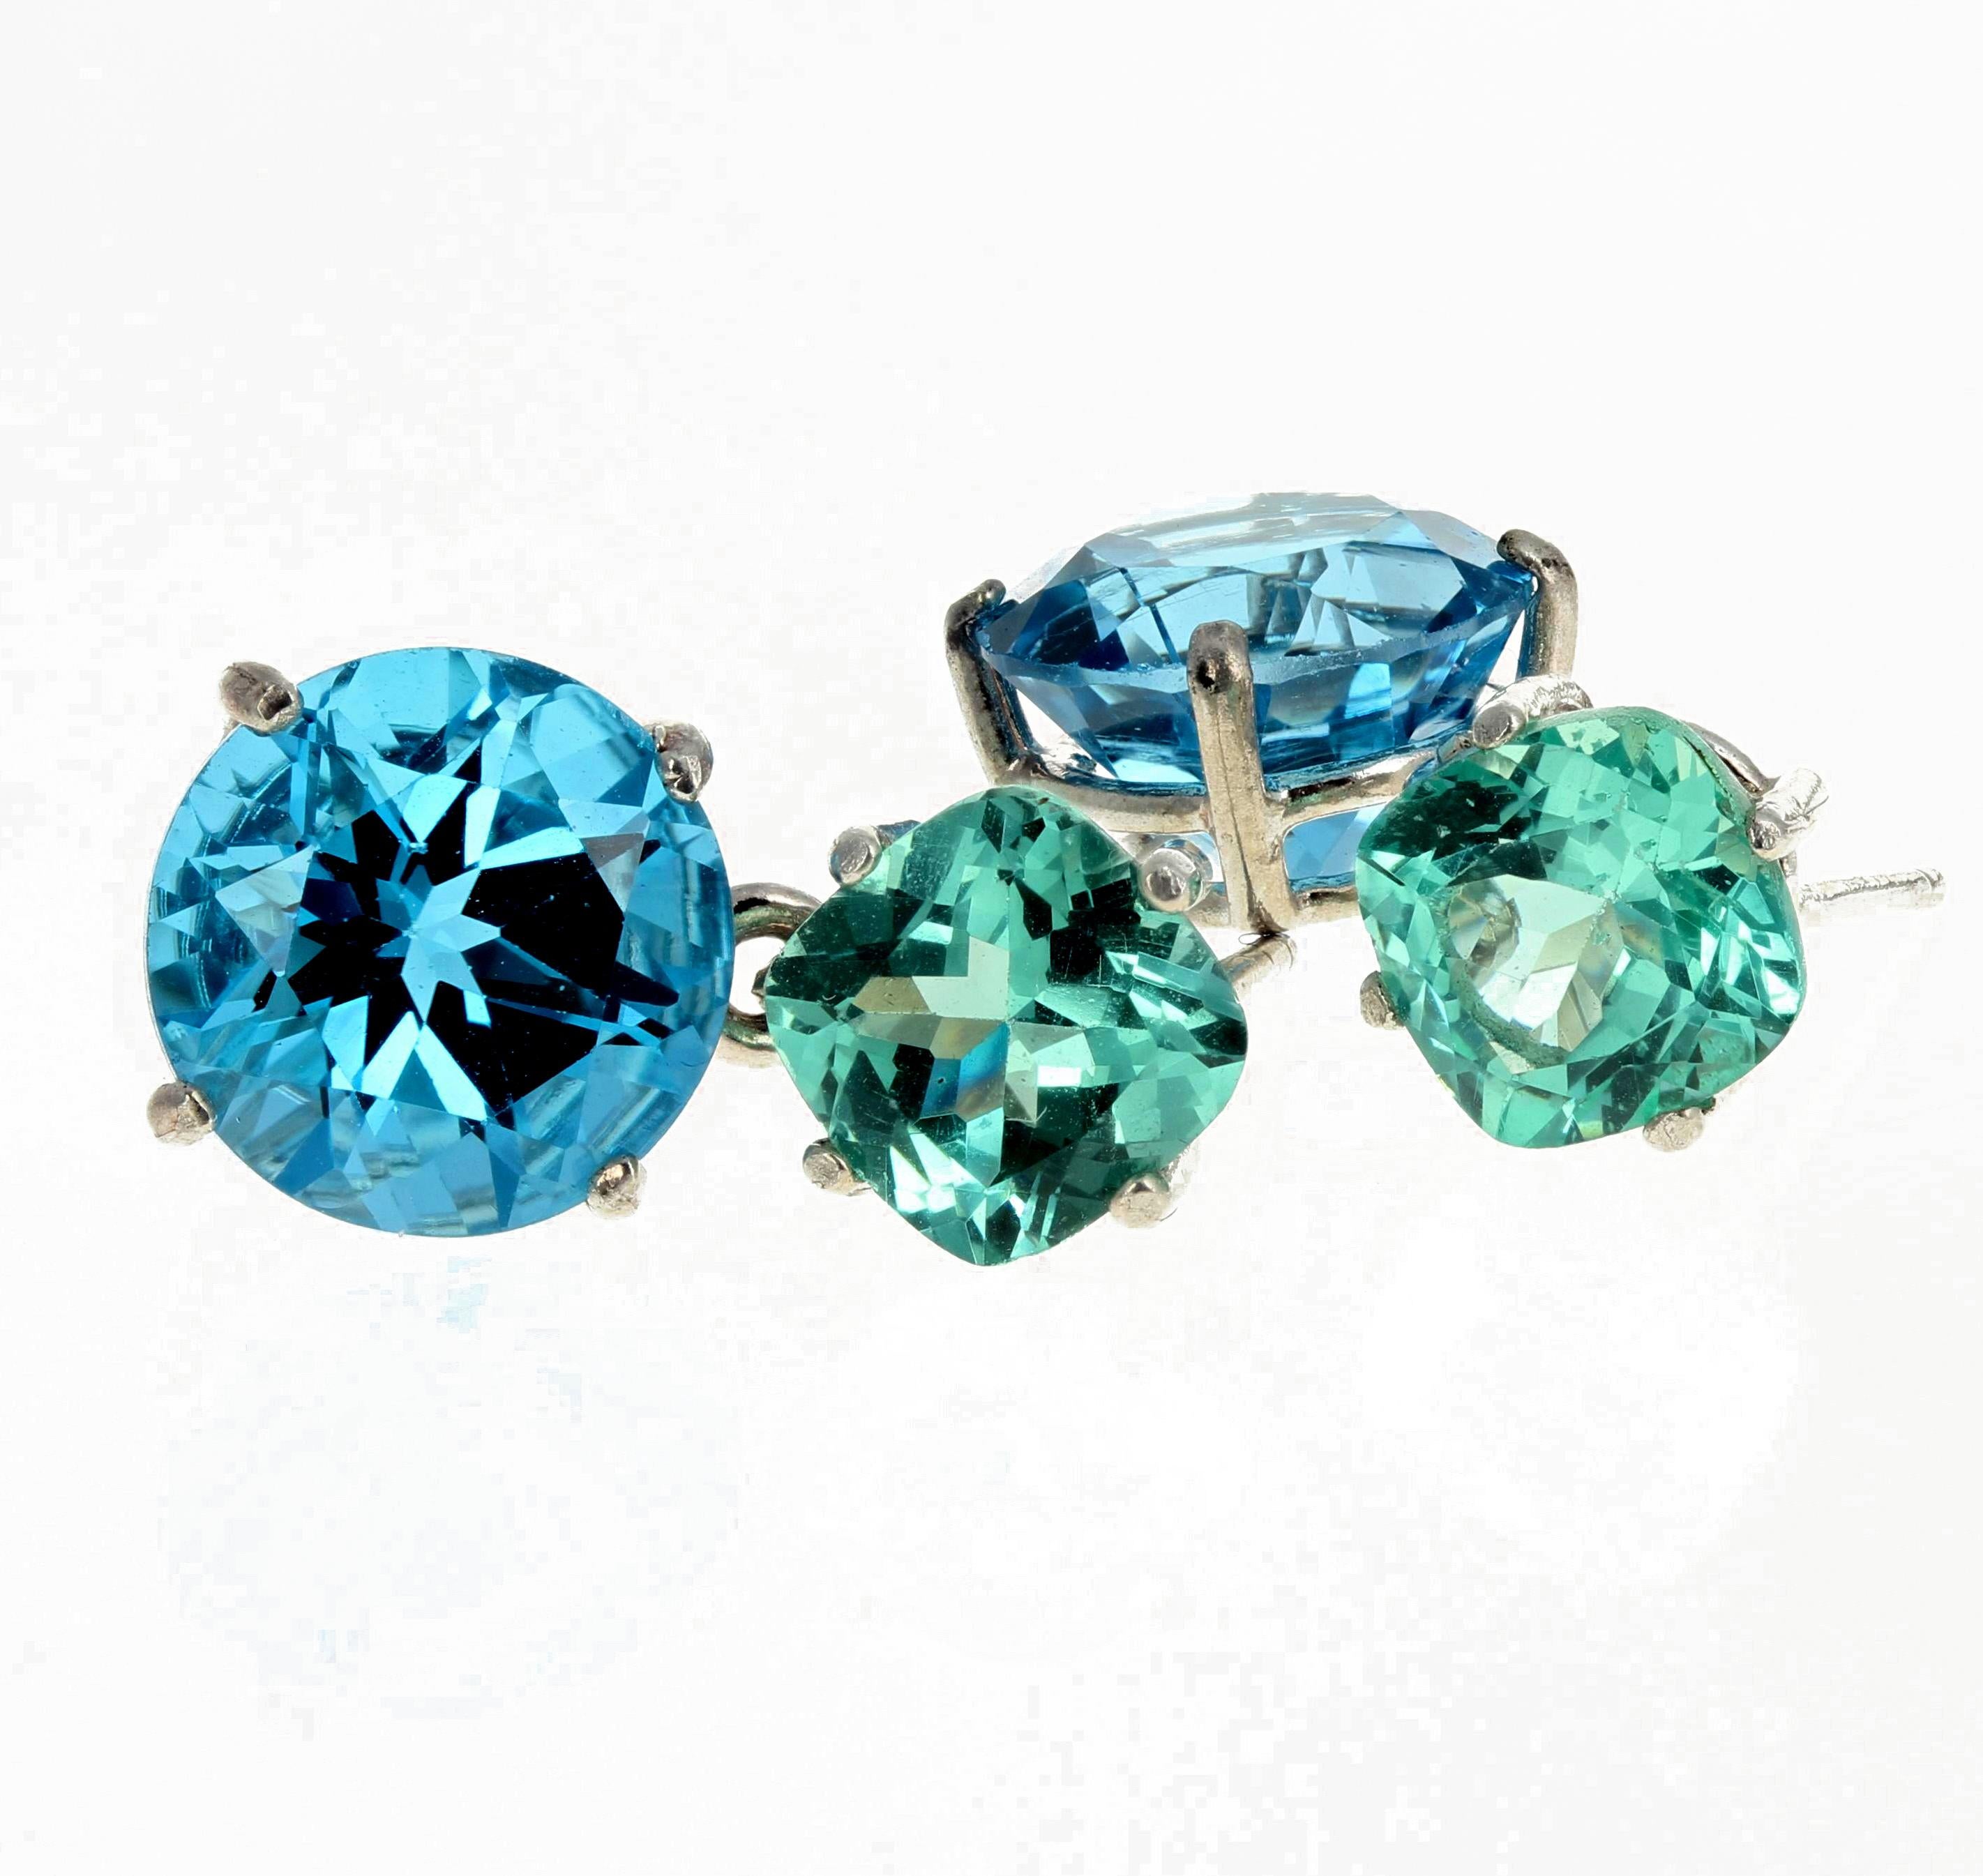 These gorgeous brilliant 2.58 Ct sparkling blue green cushion cut natural Apatite enhance the glittering round swinging 9.6 Ct blue Topaz set in swinging sterling silver stud earrings.  This hangs 20 mm long.  The blue green Apatites are